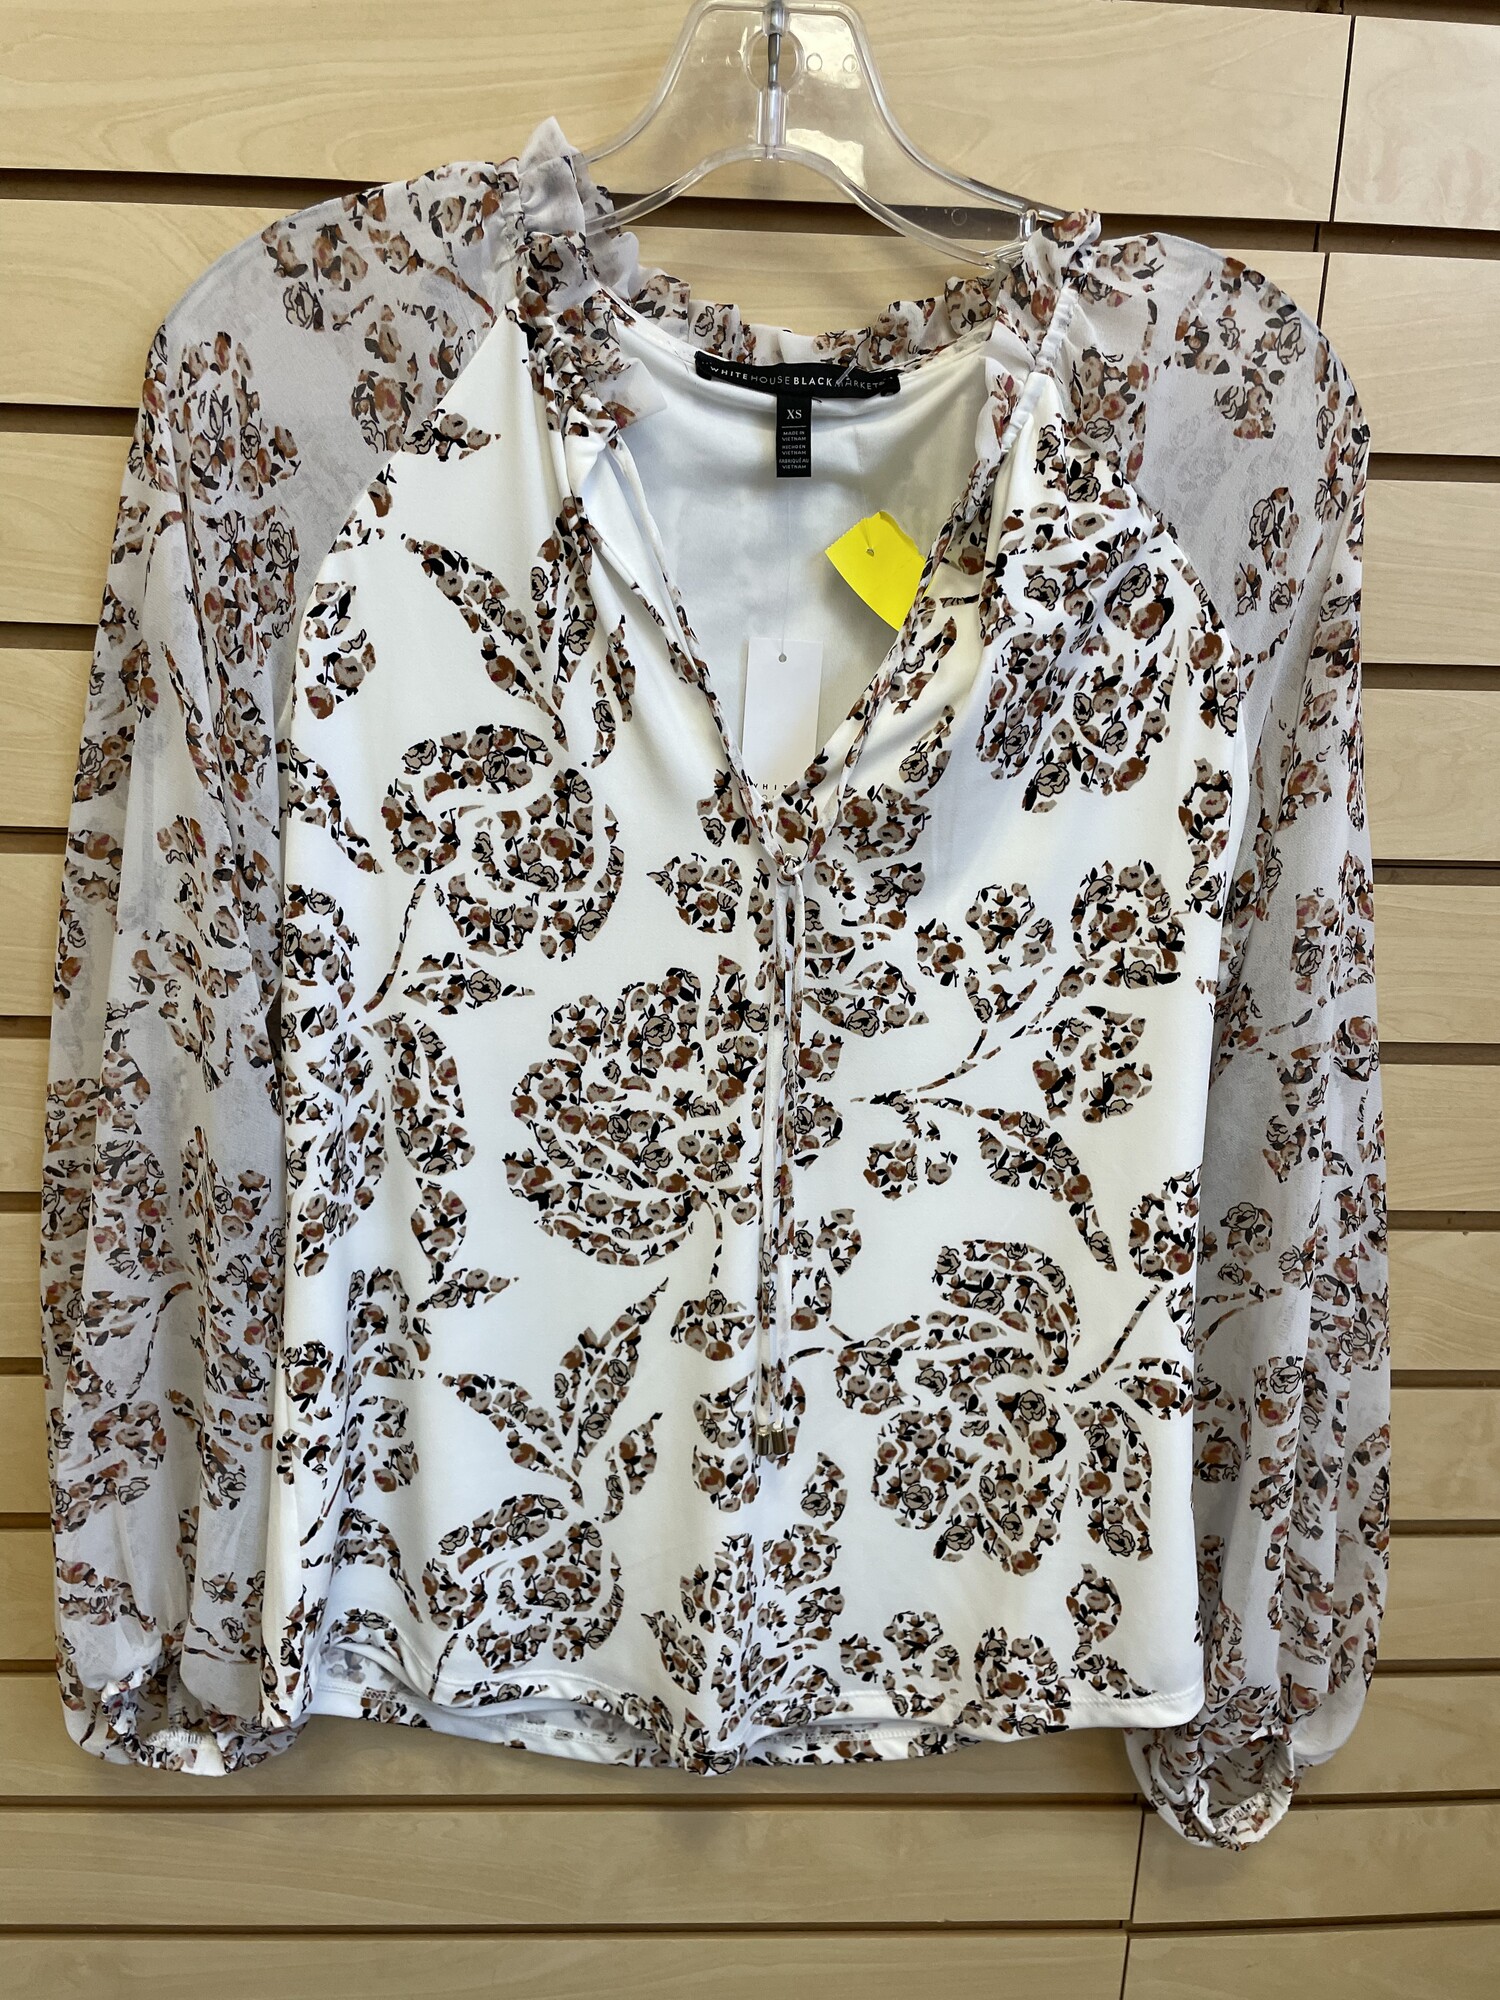 NWT WHBM Top, Long Shear Sleeves, Cream with Brown Floral Pattern, V Neck with Tie Front, Ruffles at Neckline, Size: XS